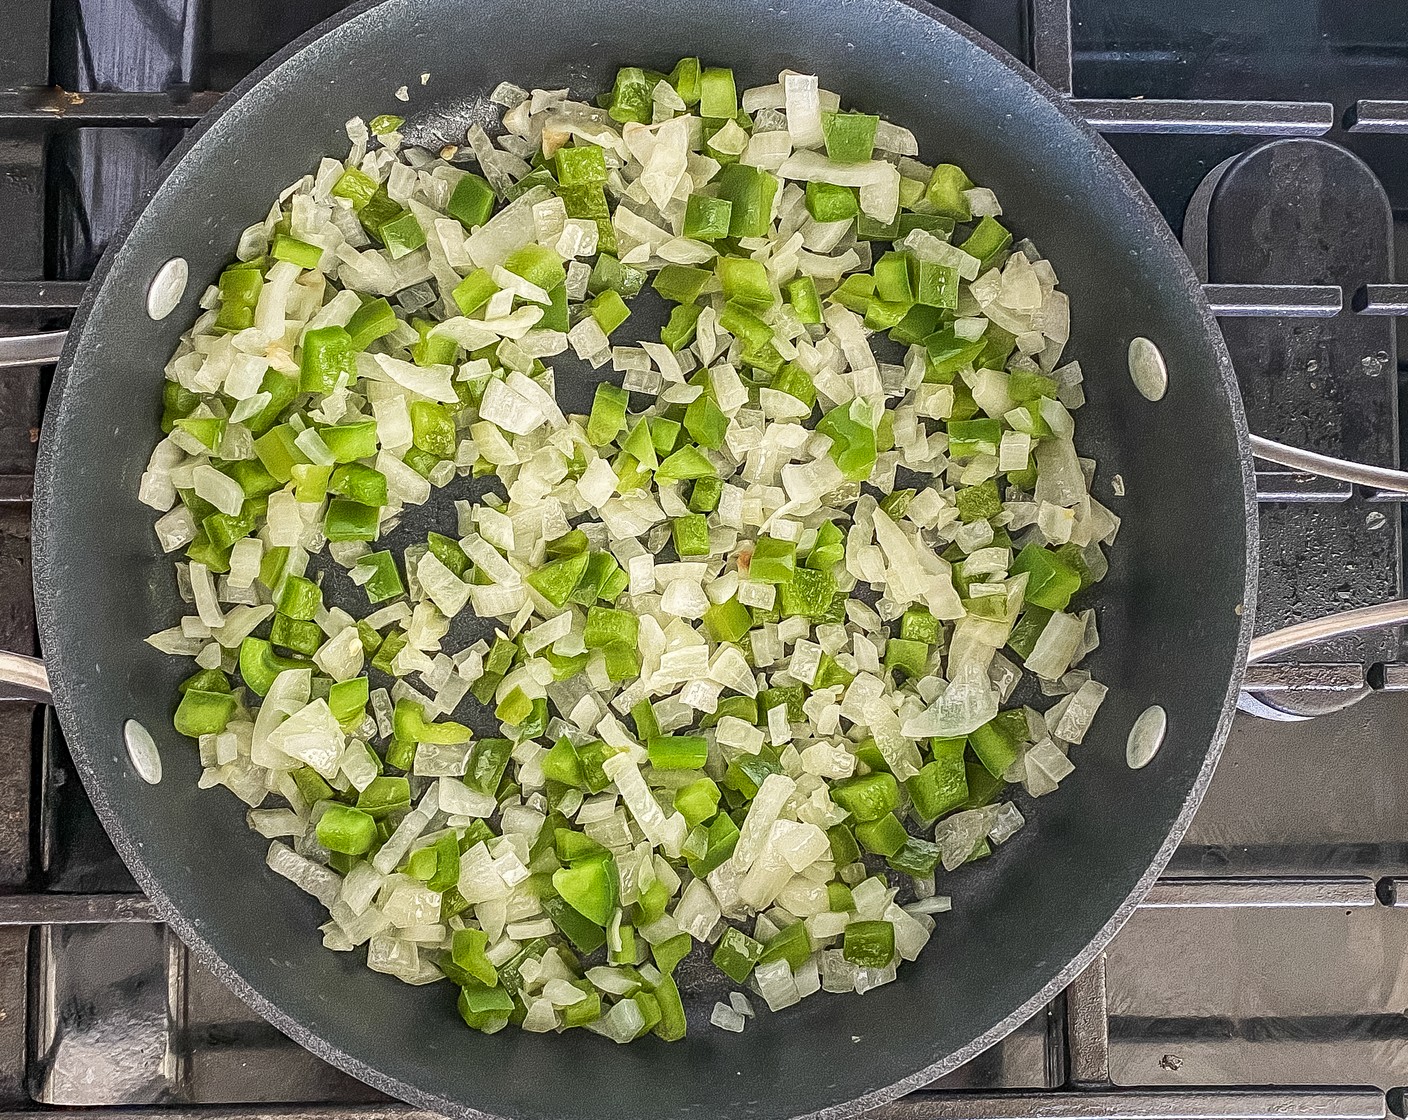 step 1 In a large non-stick skillet, heat Olive Oil (1 tsp) over medium-high heat. Add the Yellow Onion (1) and Green Bell Pepper (1) and cook for 5 minutes.